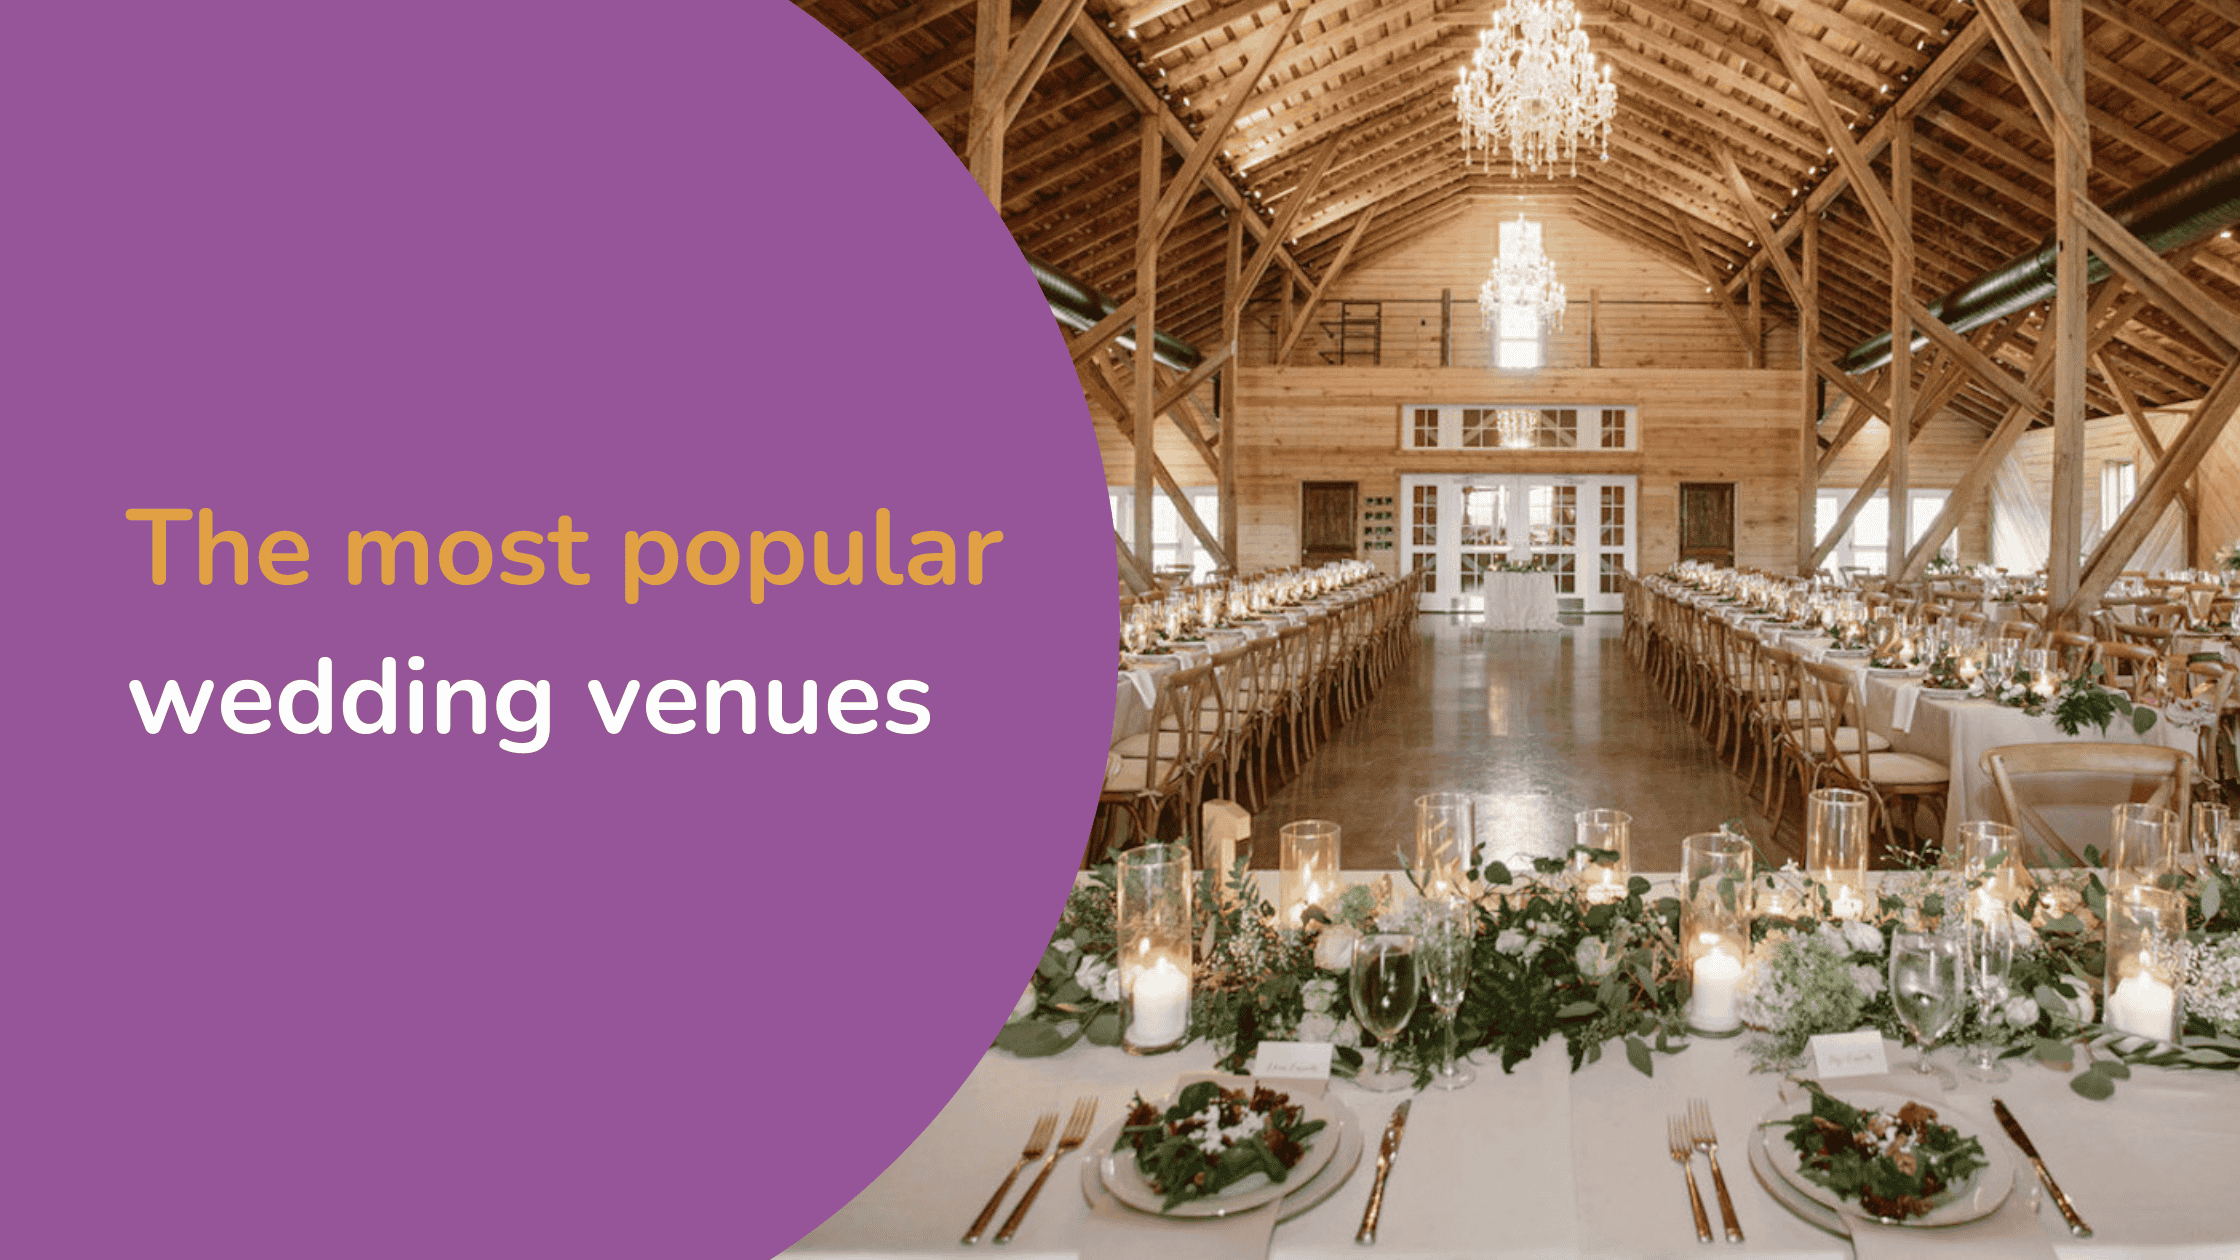 Image of a wedding venue with the title 'The most popular wedding venues’